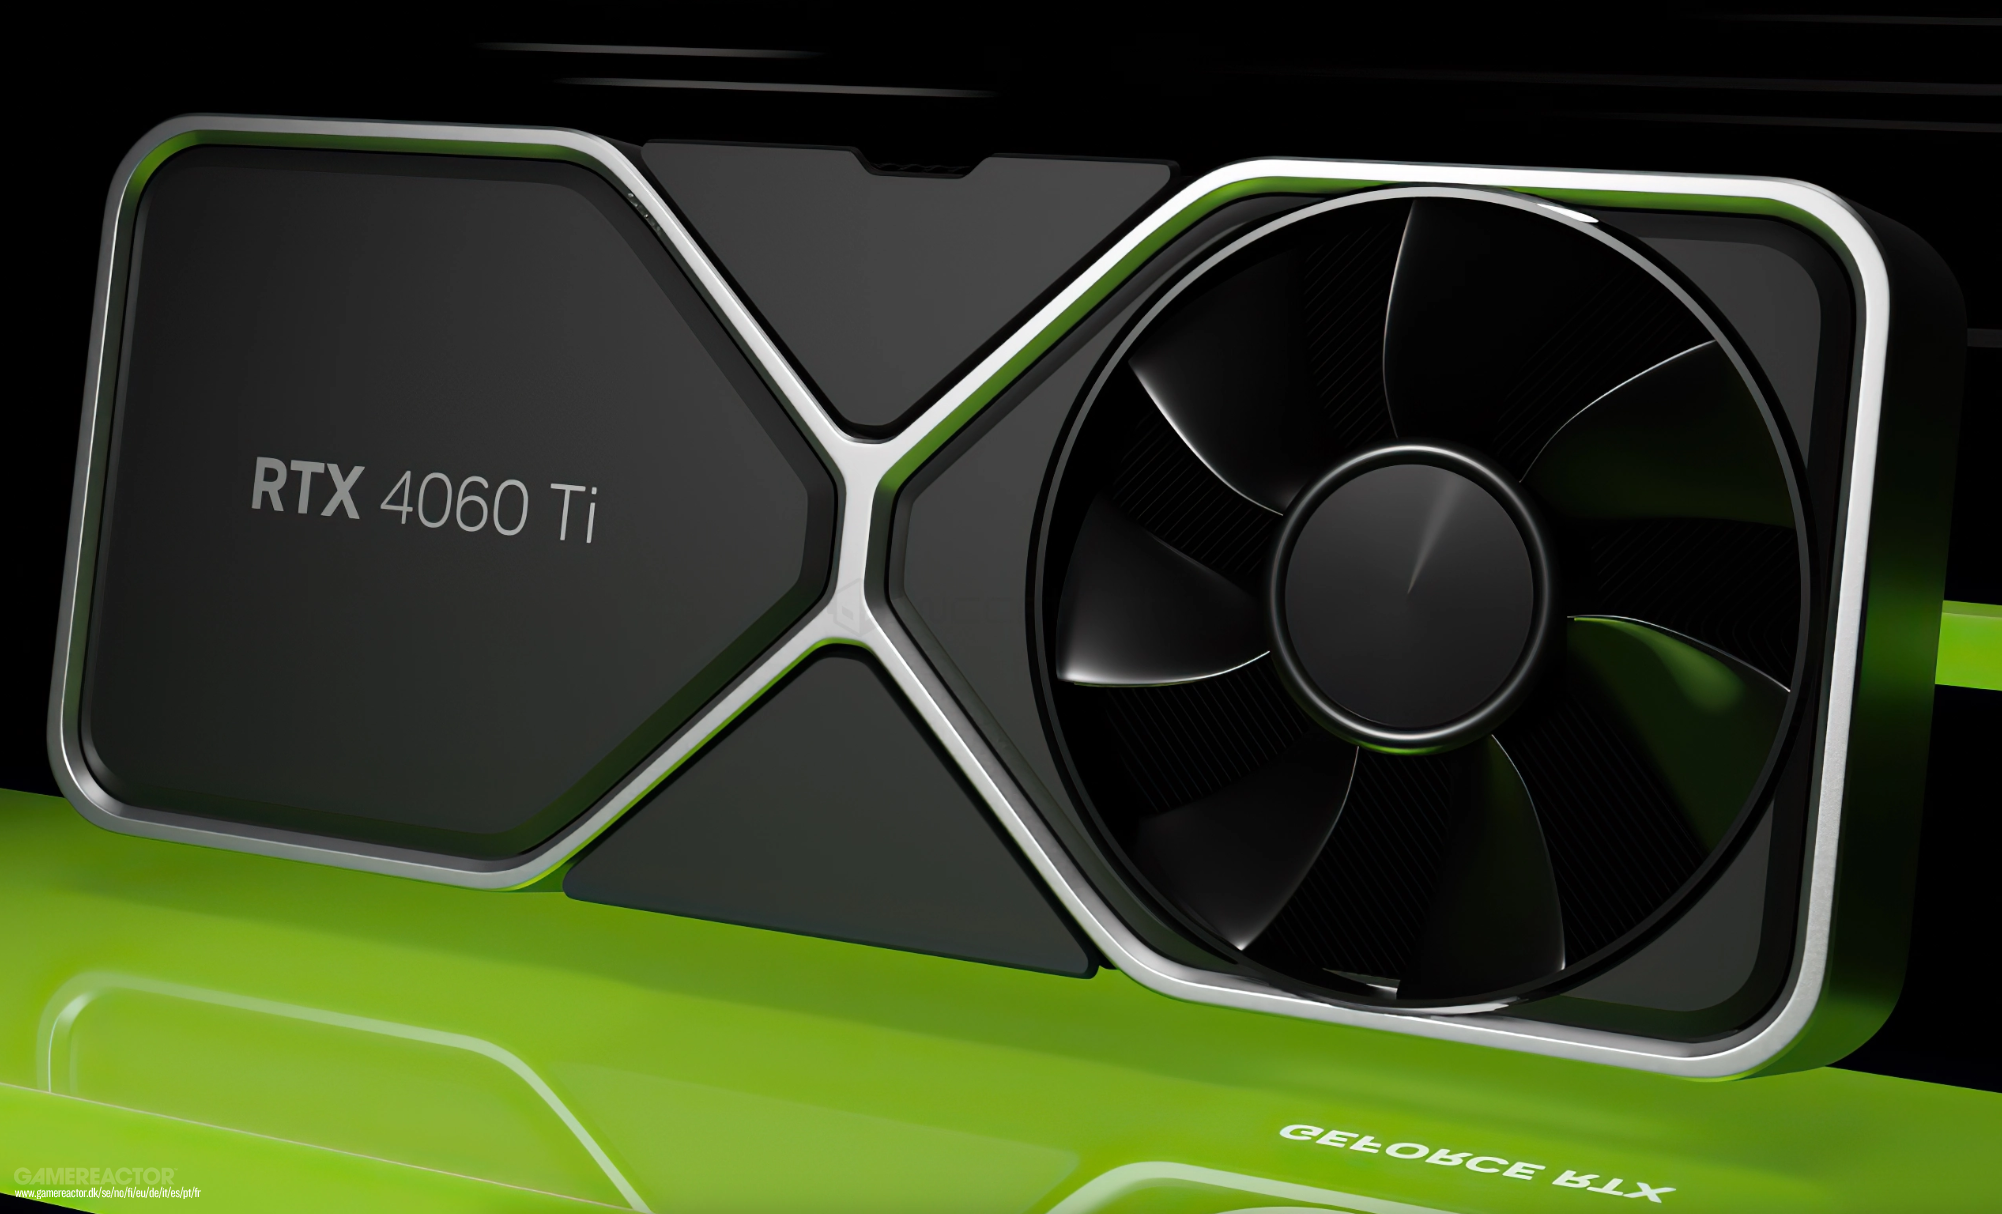 Nvidia appears to be gearing up for a 40-series renewal in January